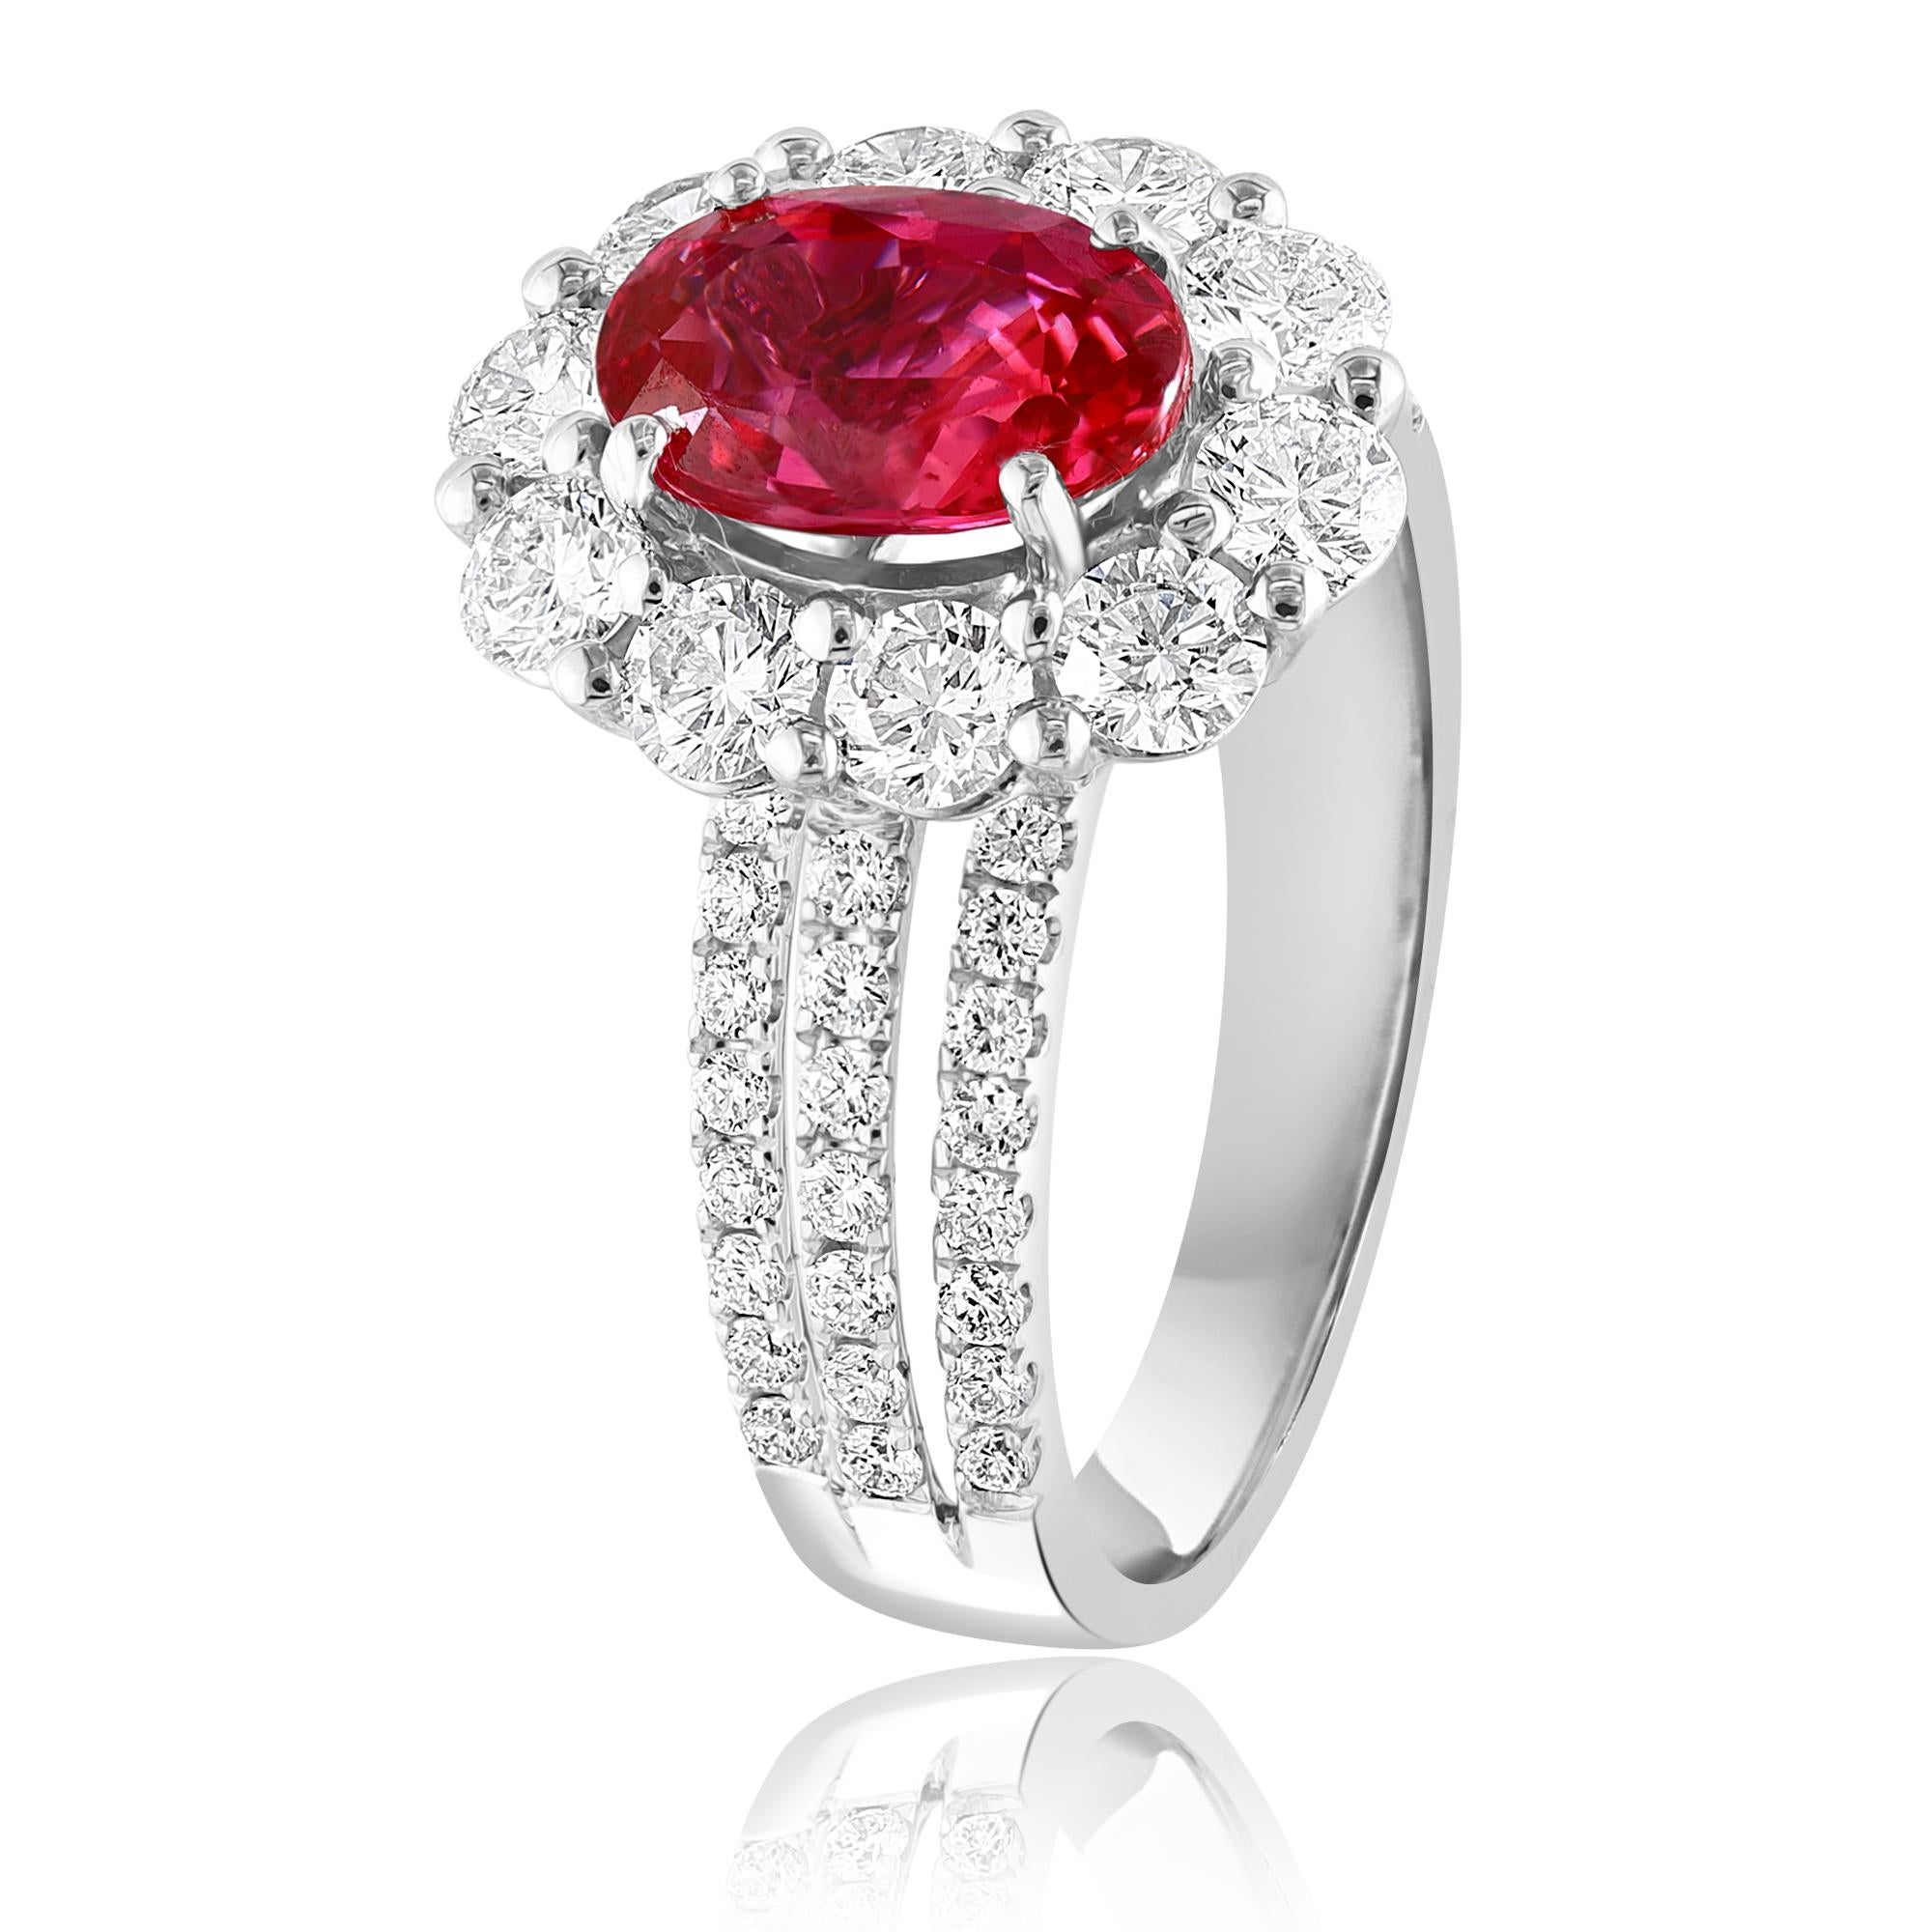 A brilliant and unique piece featuring an Oval Cut Natural Ruby and brilliant-cut round shape diamonds.
The natural ruby in the center weighs 2.05 carats total; 10 round brilliant diamonds surrounding the center stone weigh 1.09 carats total. 46